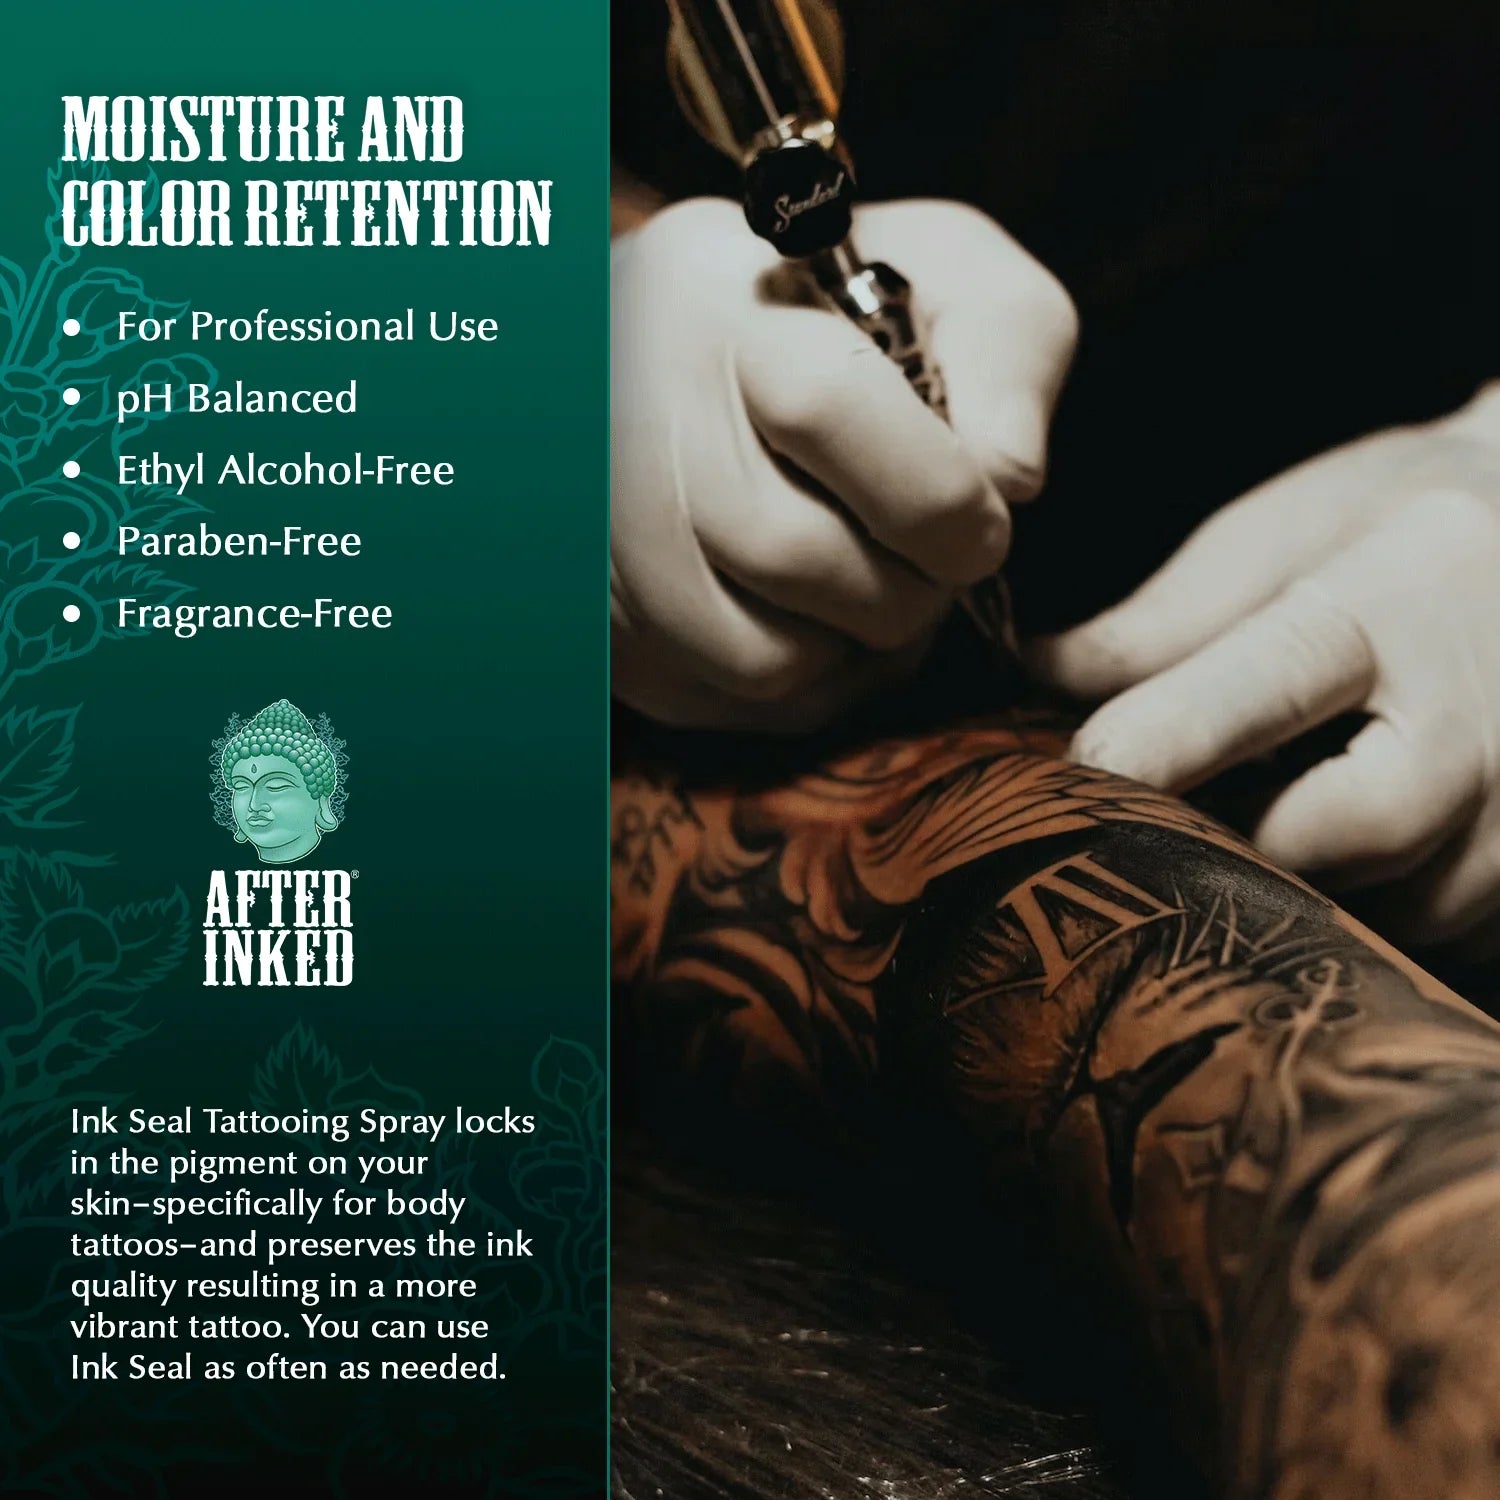 Best Tattoo Cover Makeup - Waterproof Concealer To Cover Tattoo